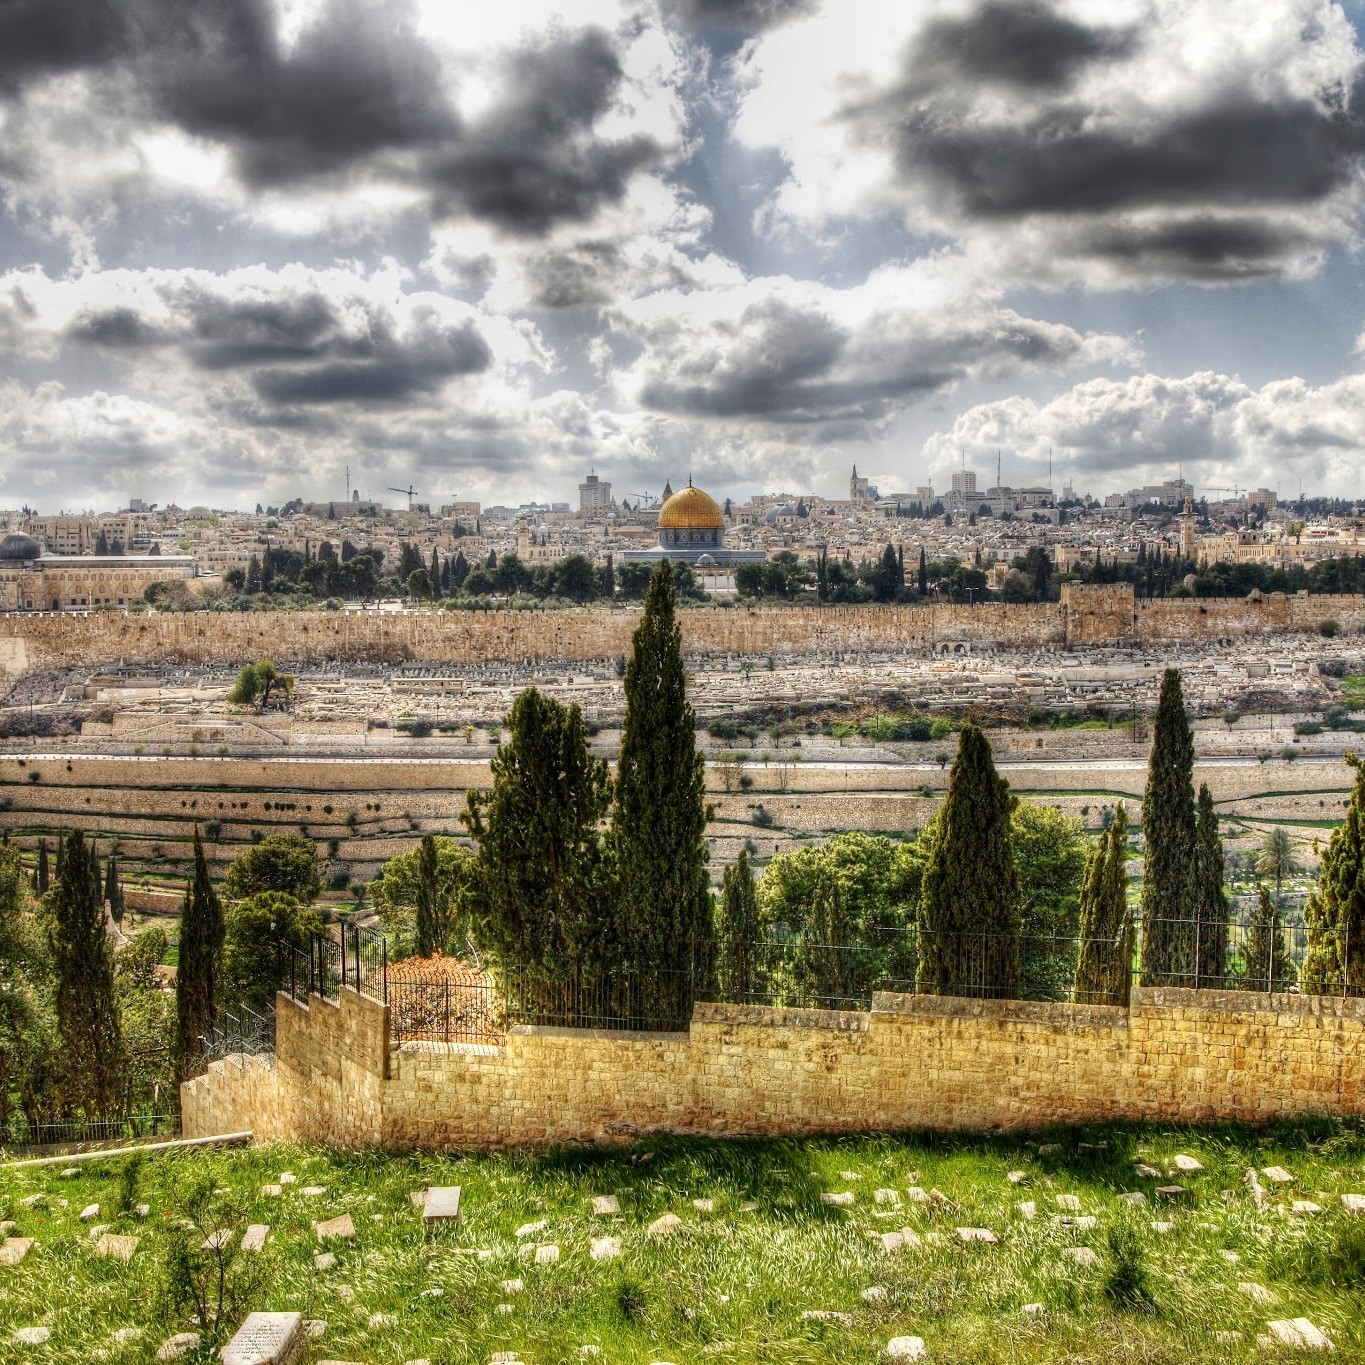 Israel - View of the Old City from the Mount of Olives